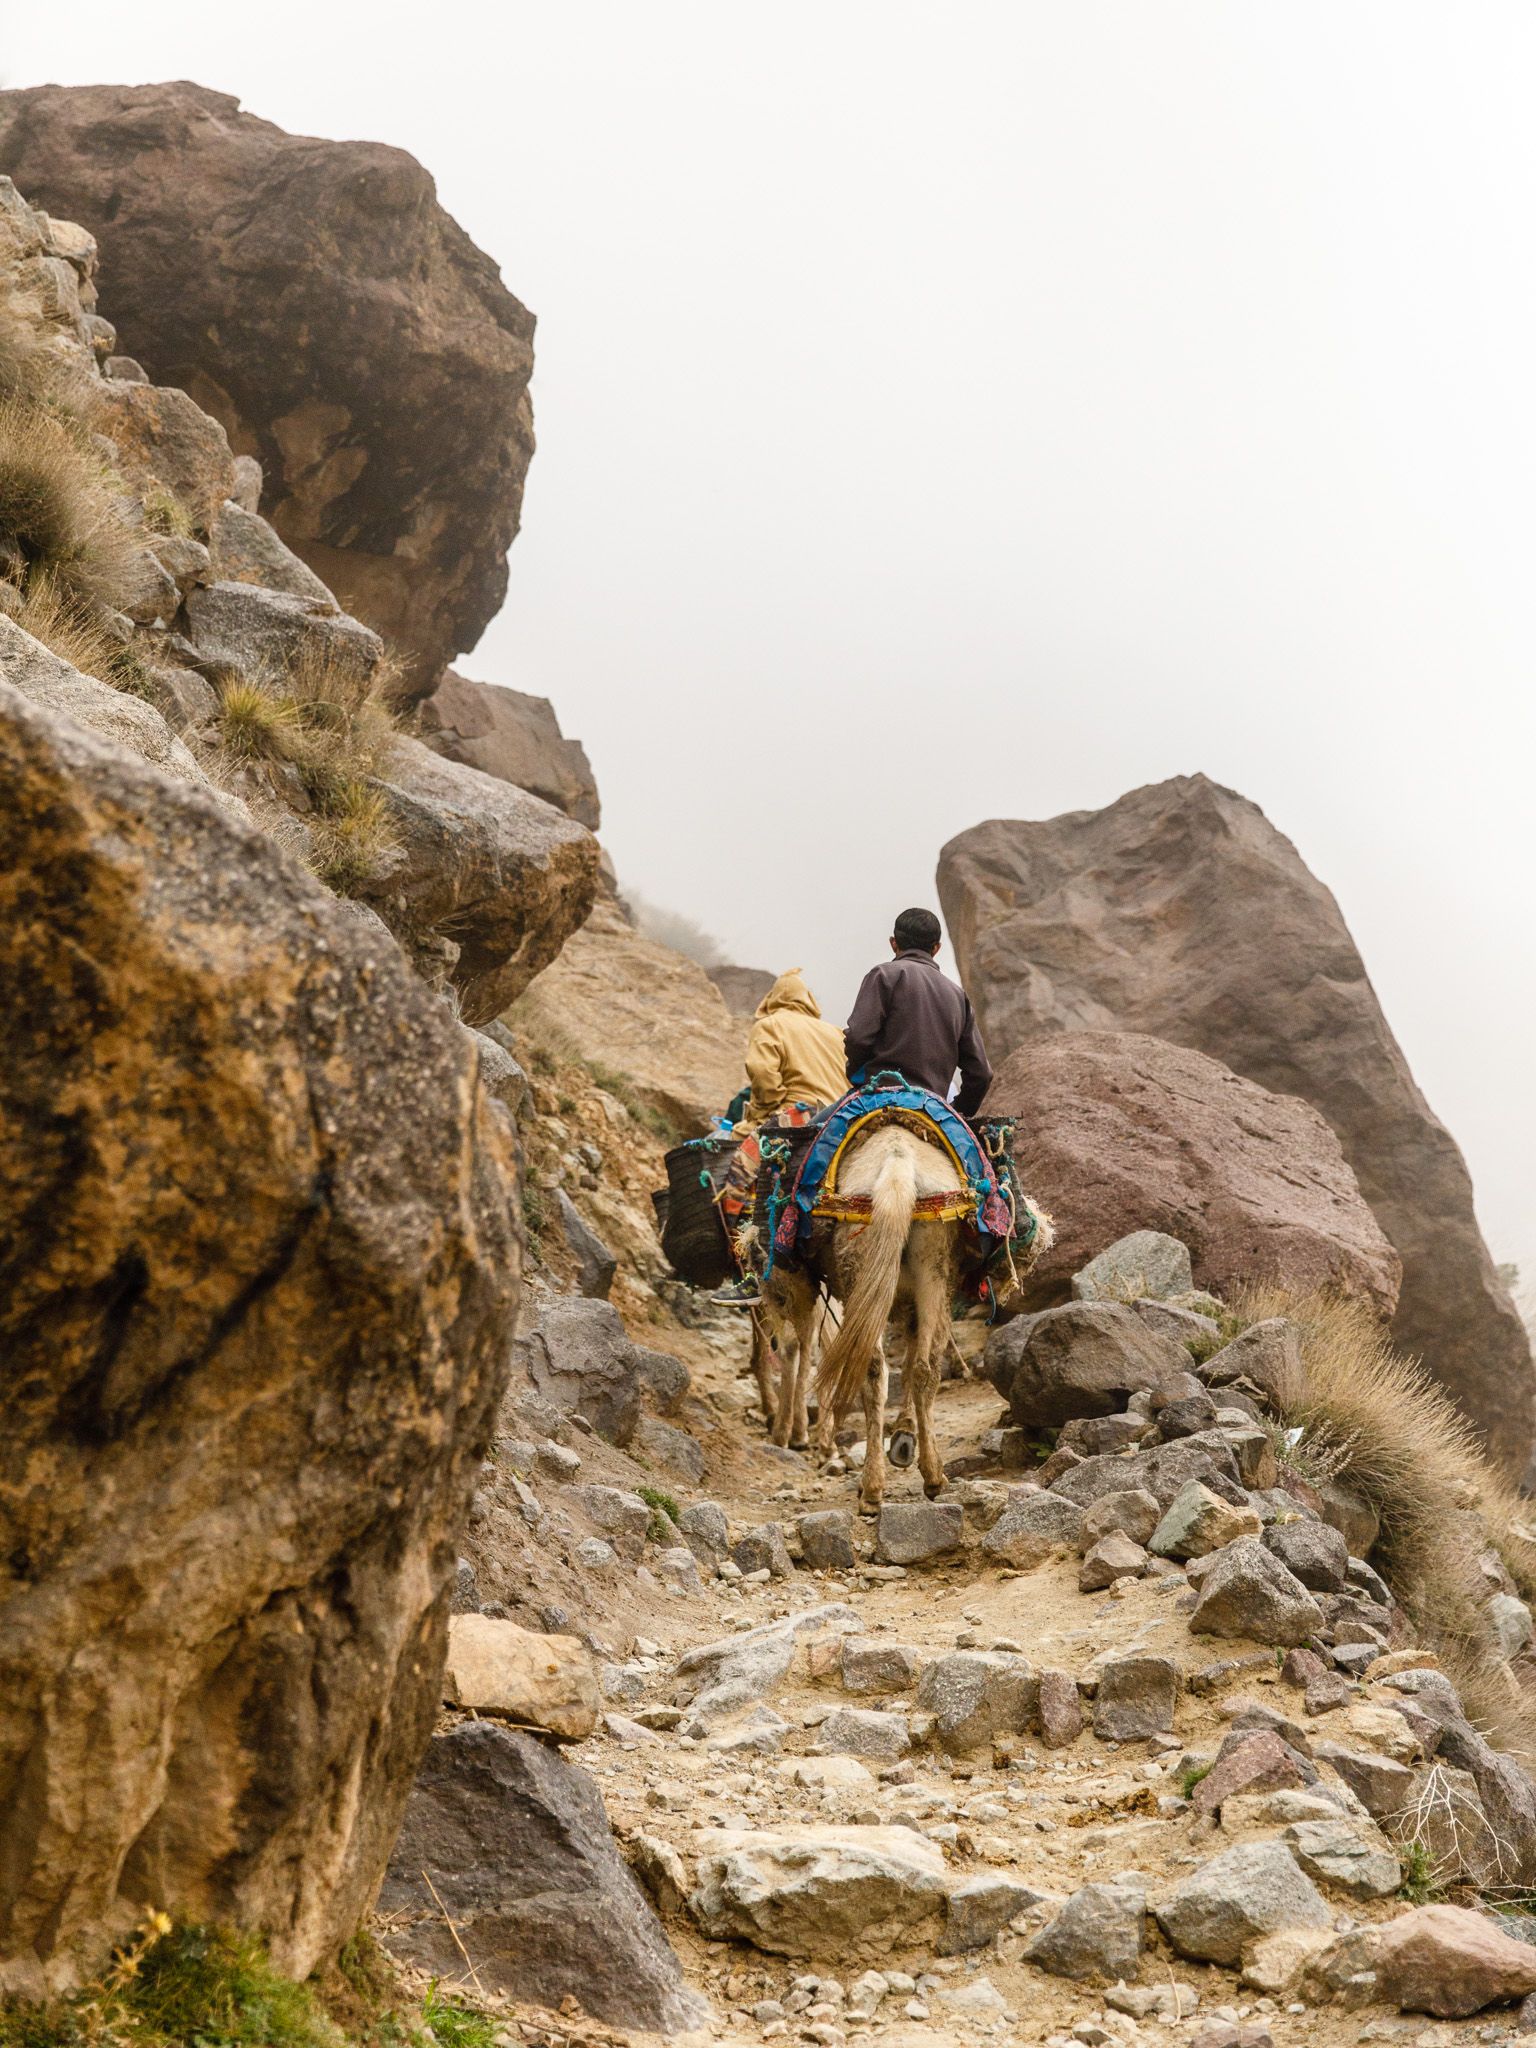 Two men ride pack mules up a trail in the High Atlas Mountains of Morocco